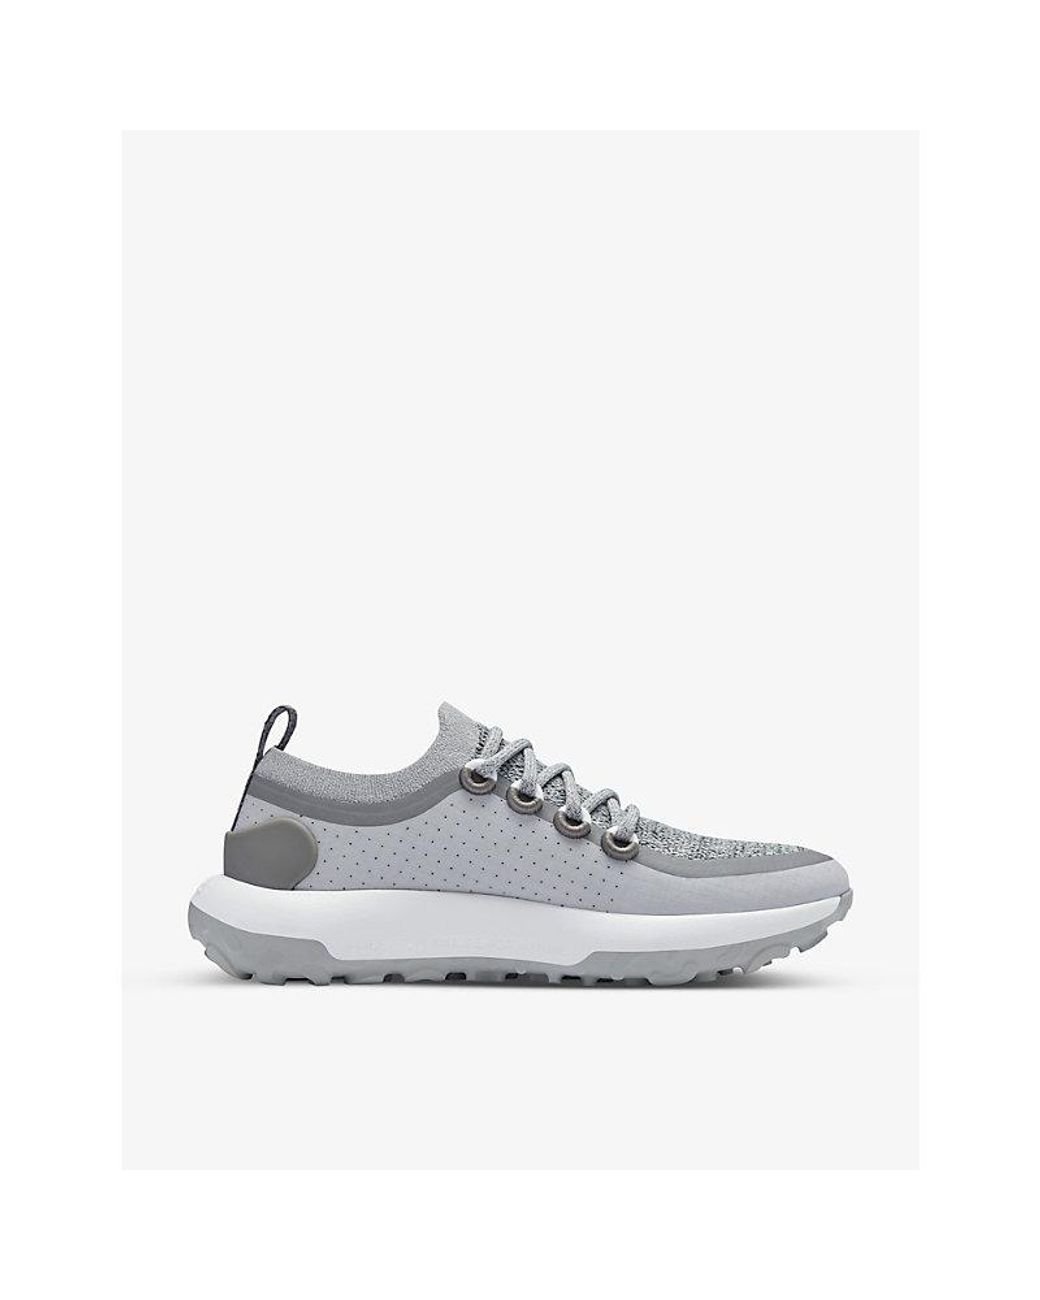 ALLBIRDS Trail Runner Swt Low-top Woven Trainers in White | Lyst Canada